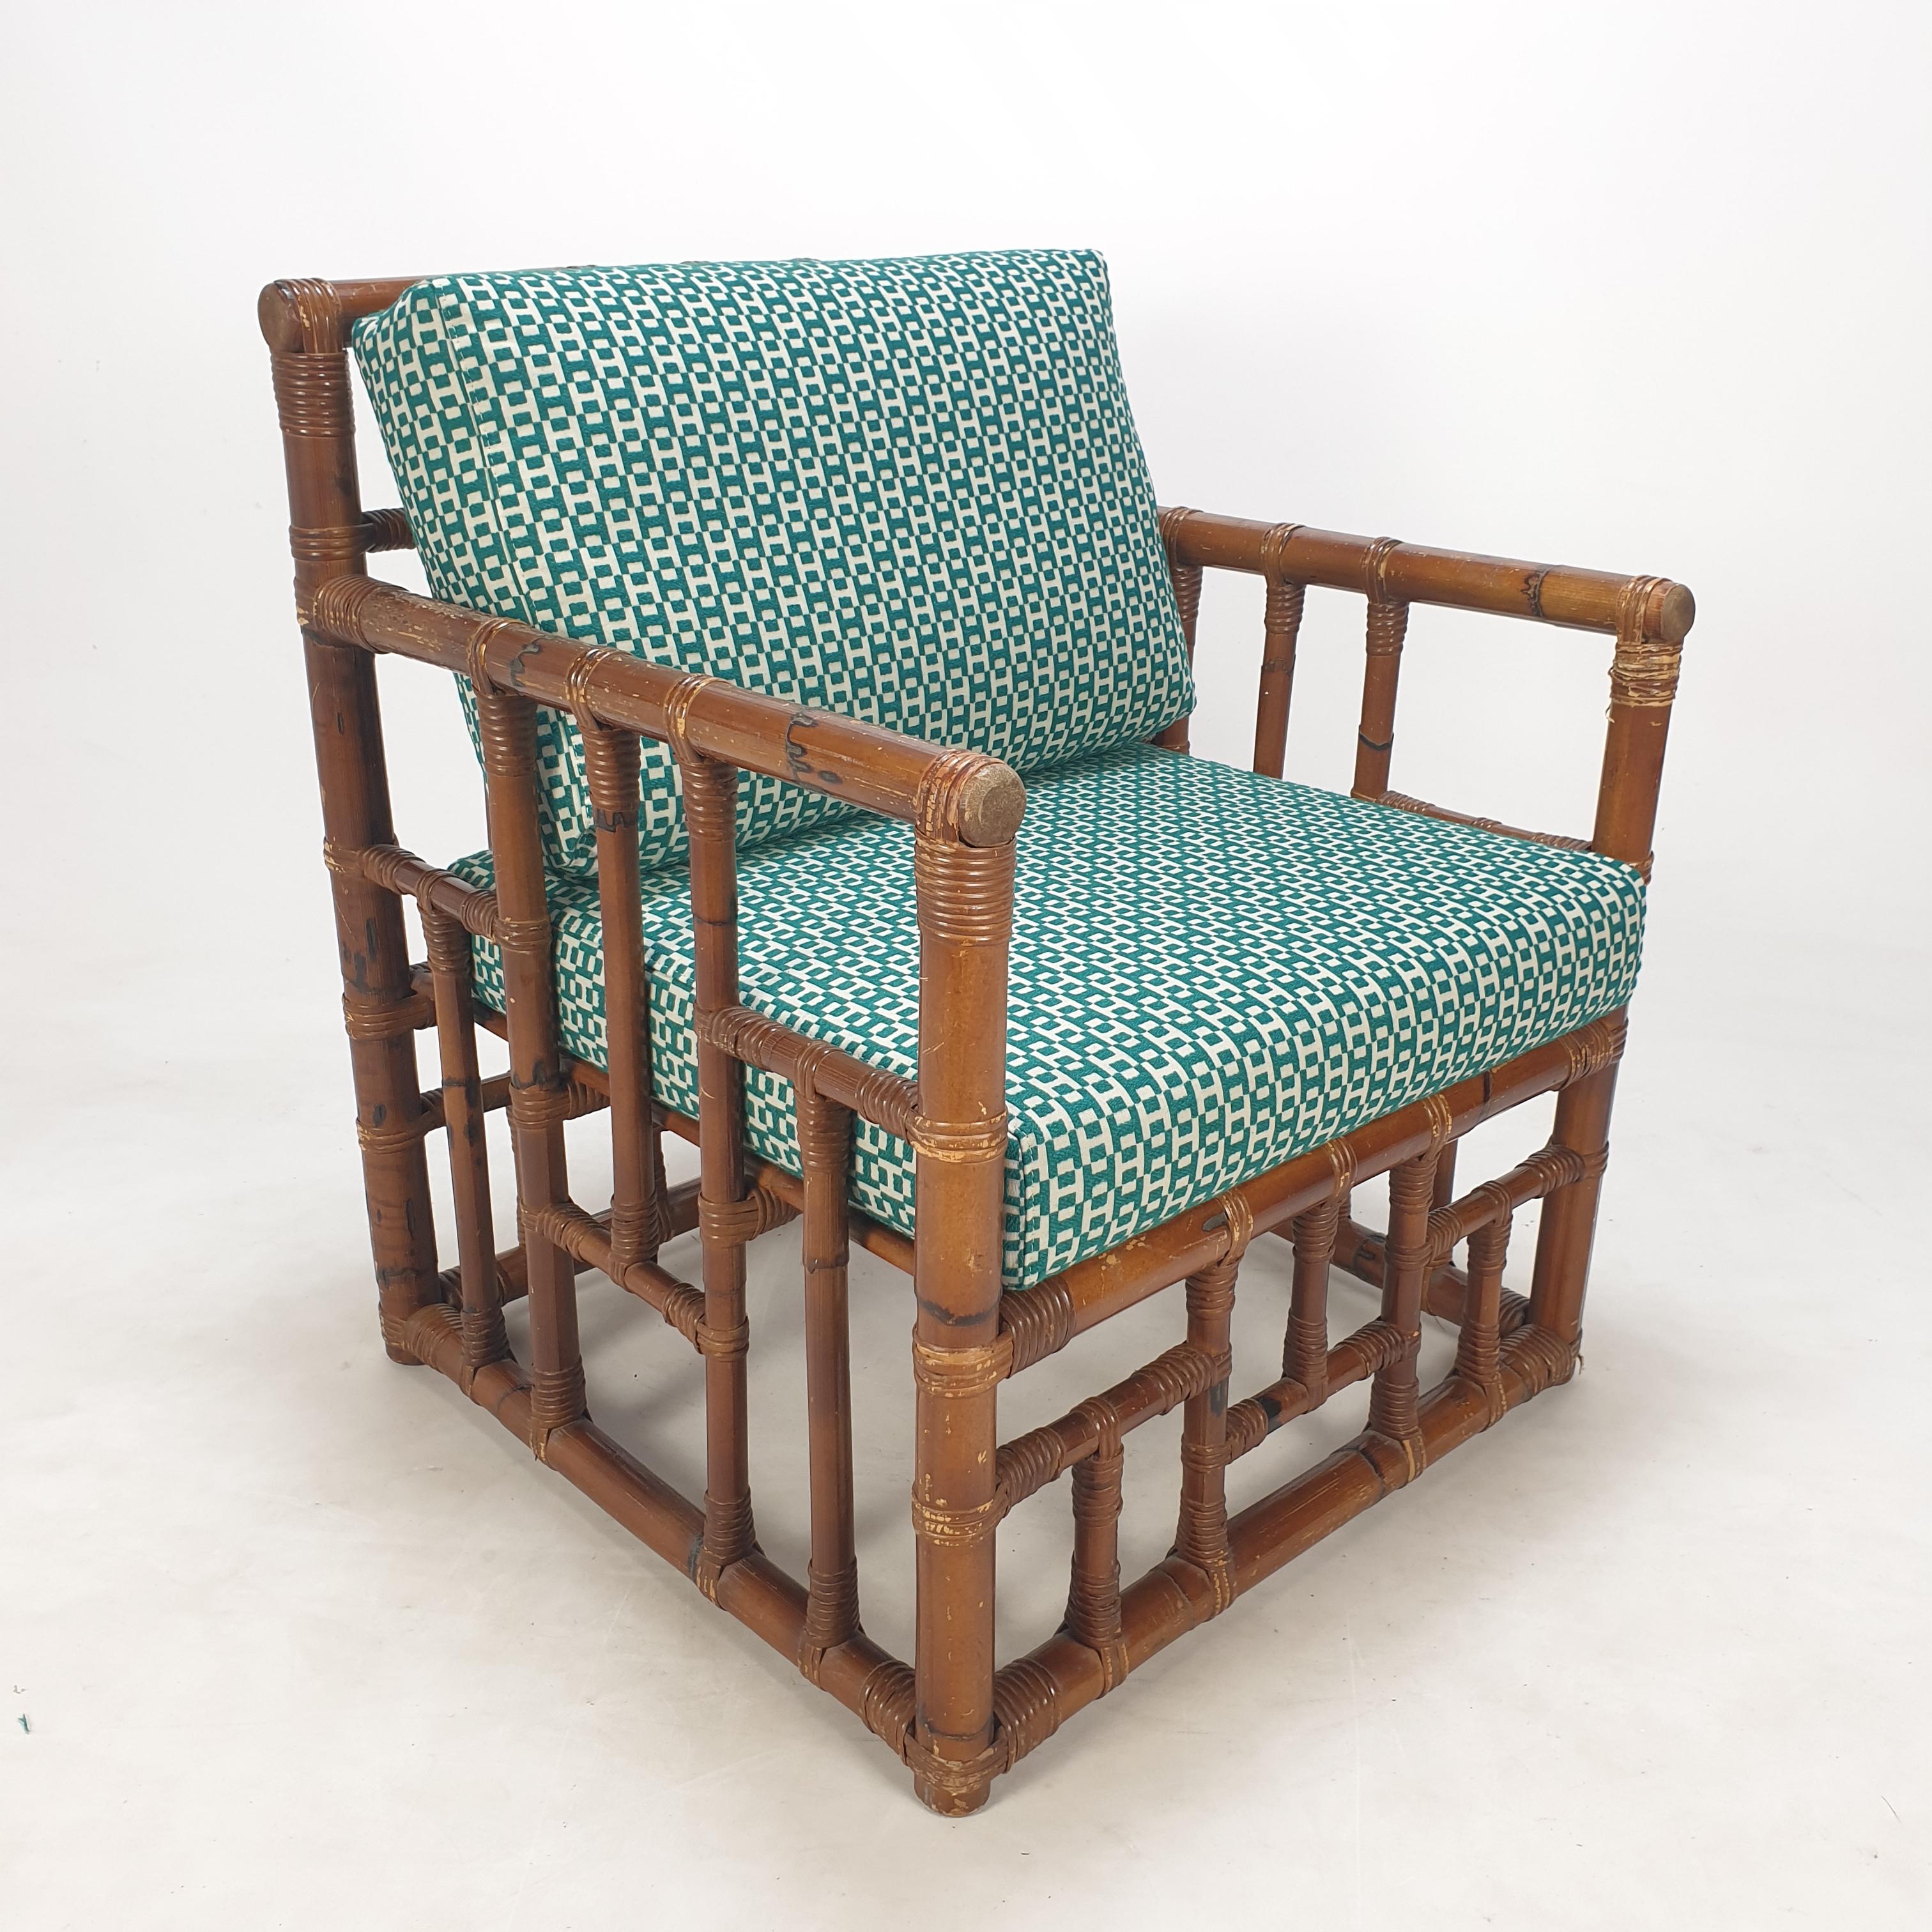 Late 20th Century Pair of Italian Bamboo Lounge Chairs with Hermès Upholstery, 1970's For Sale